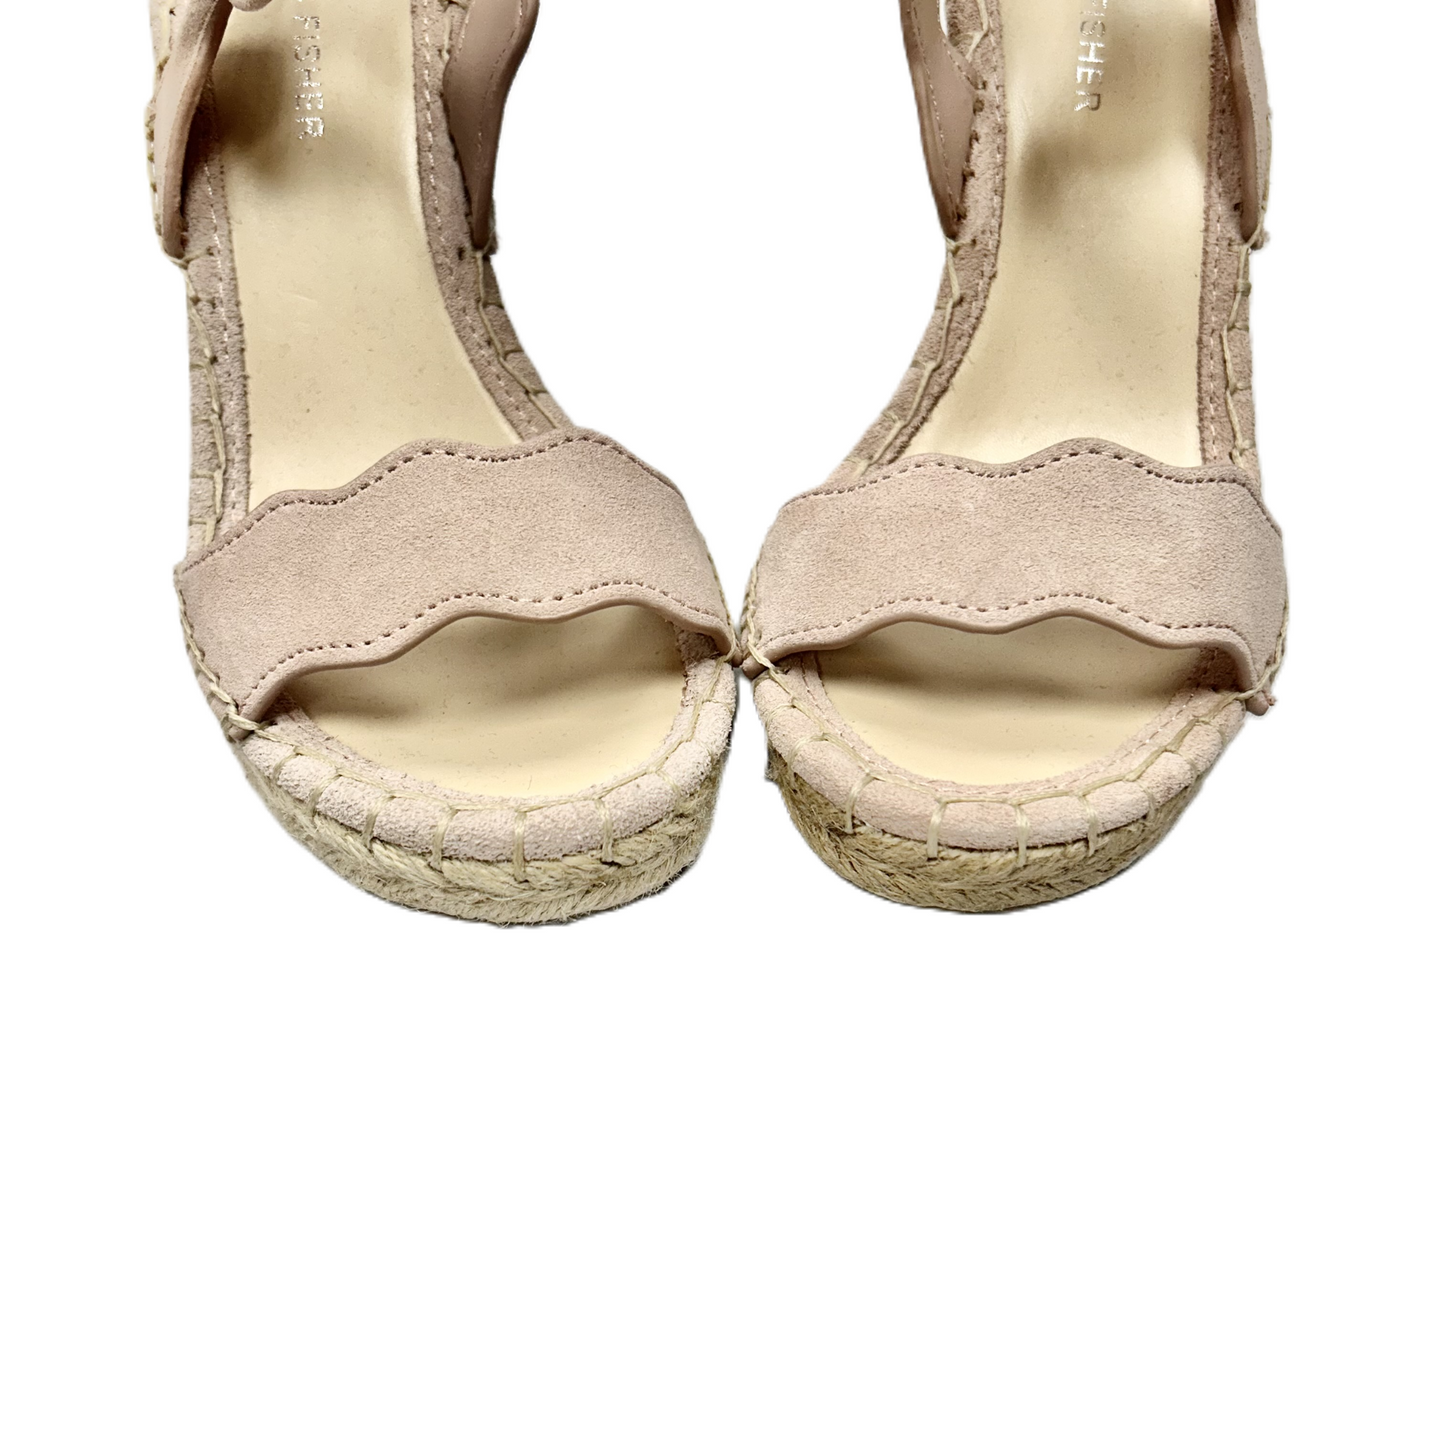 Sandals Heels Wedge By Marc Fisher  Size: 6.5